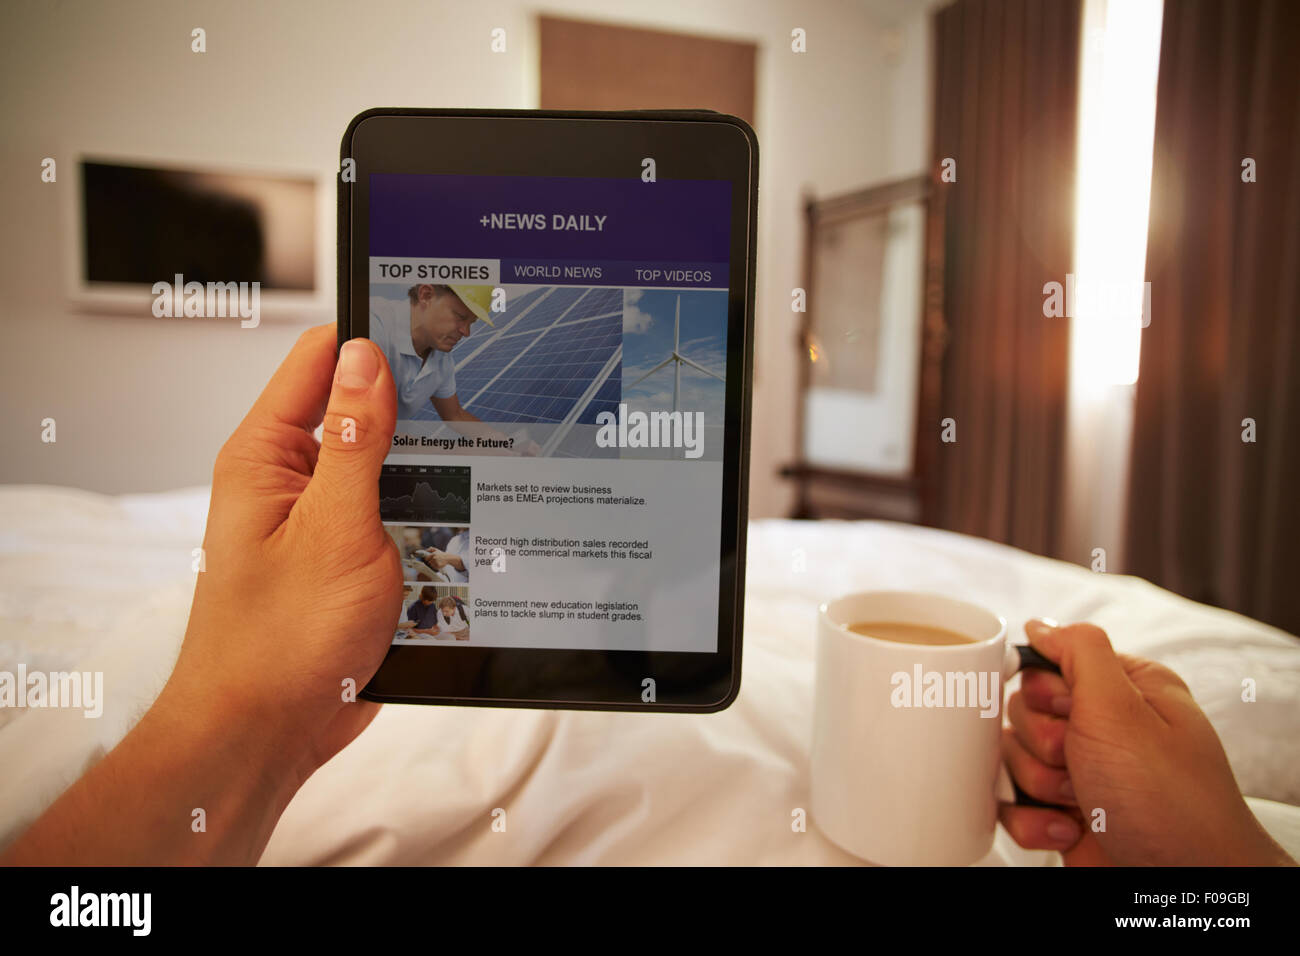 Man In Bed Looking At News Website On Digital Tablet Stock Photo